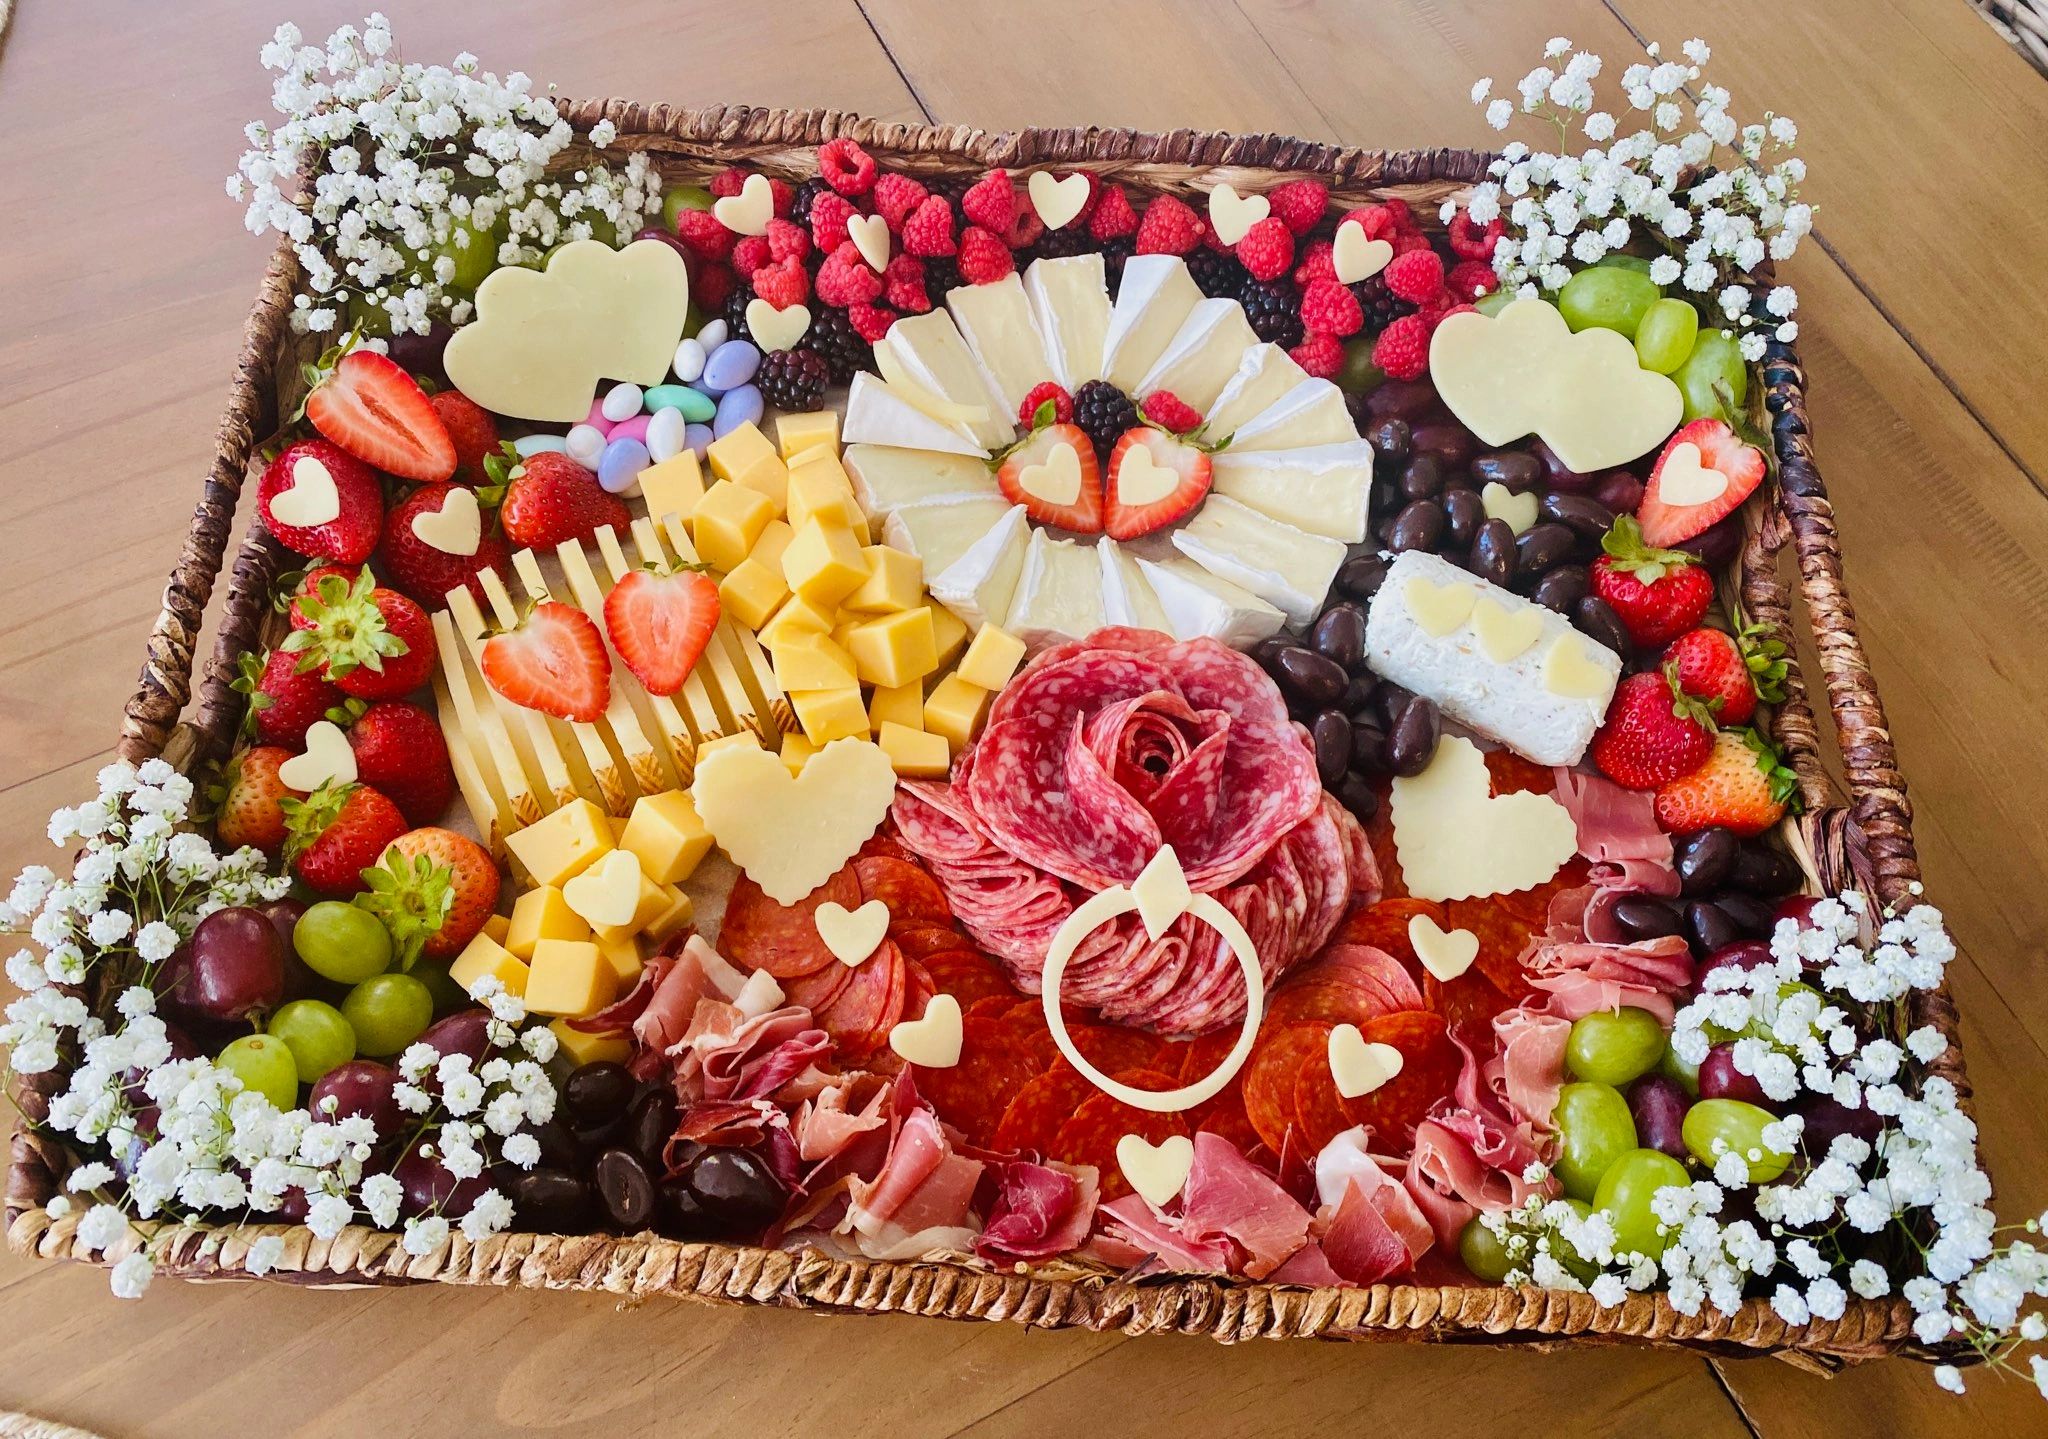 Holiday Charcuterie Boards Cooking Class - Pittsburgh Magazine Events